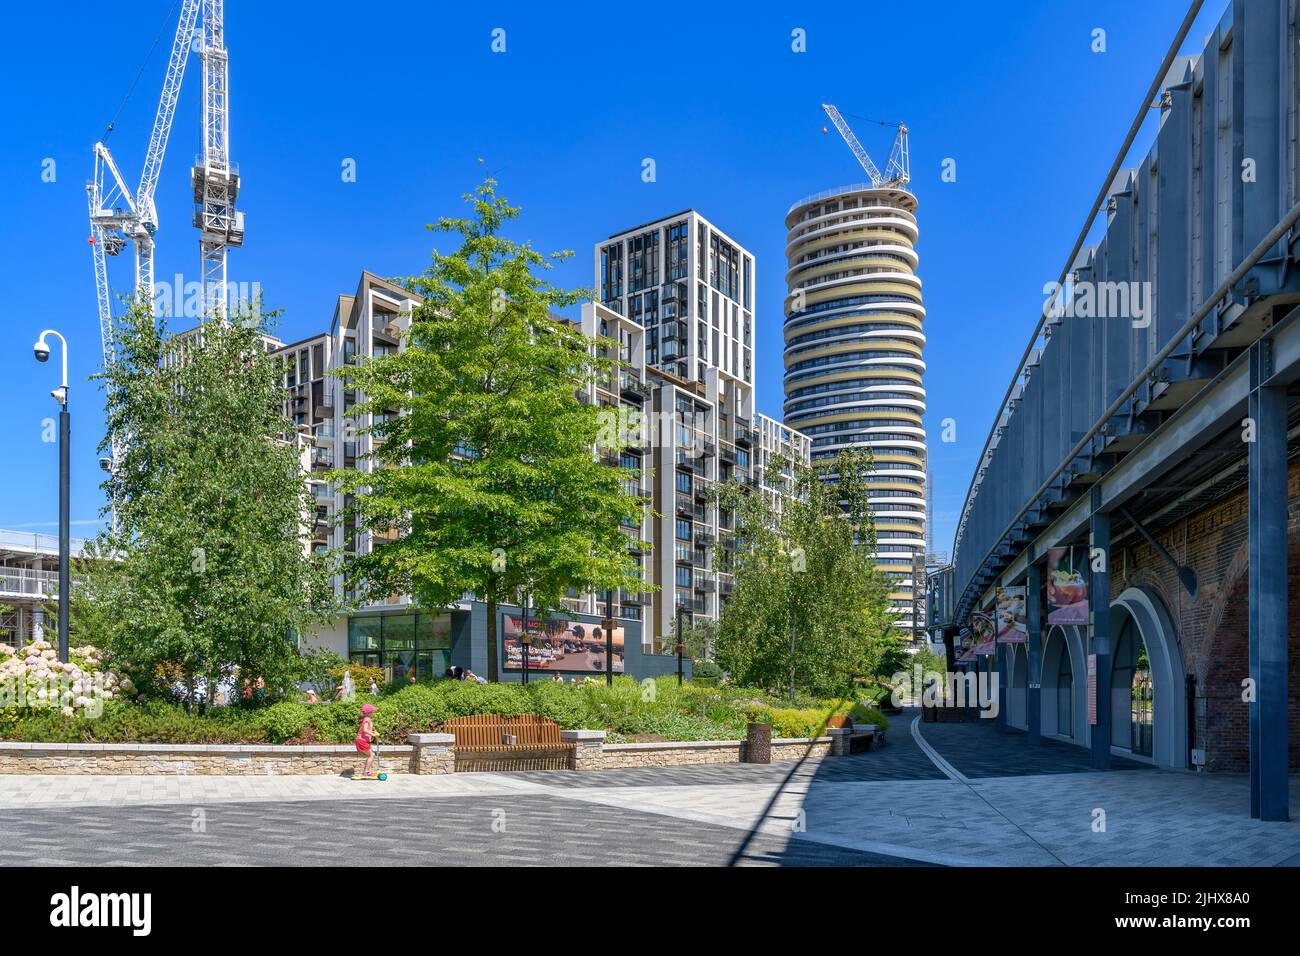 White City Living, a development of luxury apartments in Shepherd’s Bush near Television Centre and Westfield. With lavish planting and water features Stock Photo